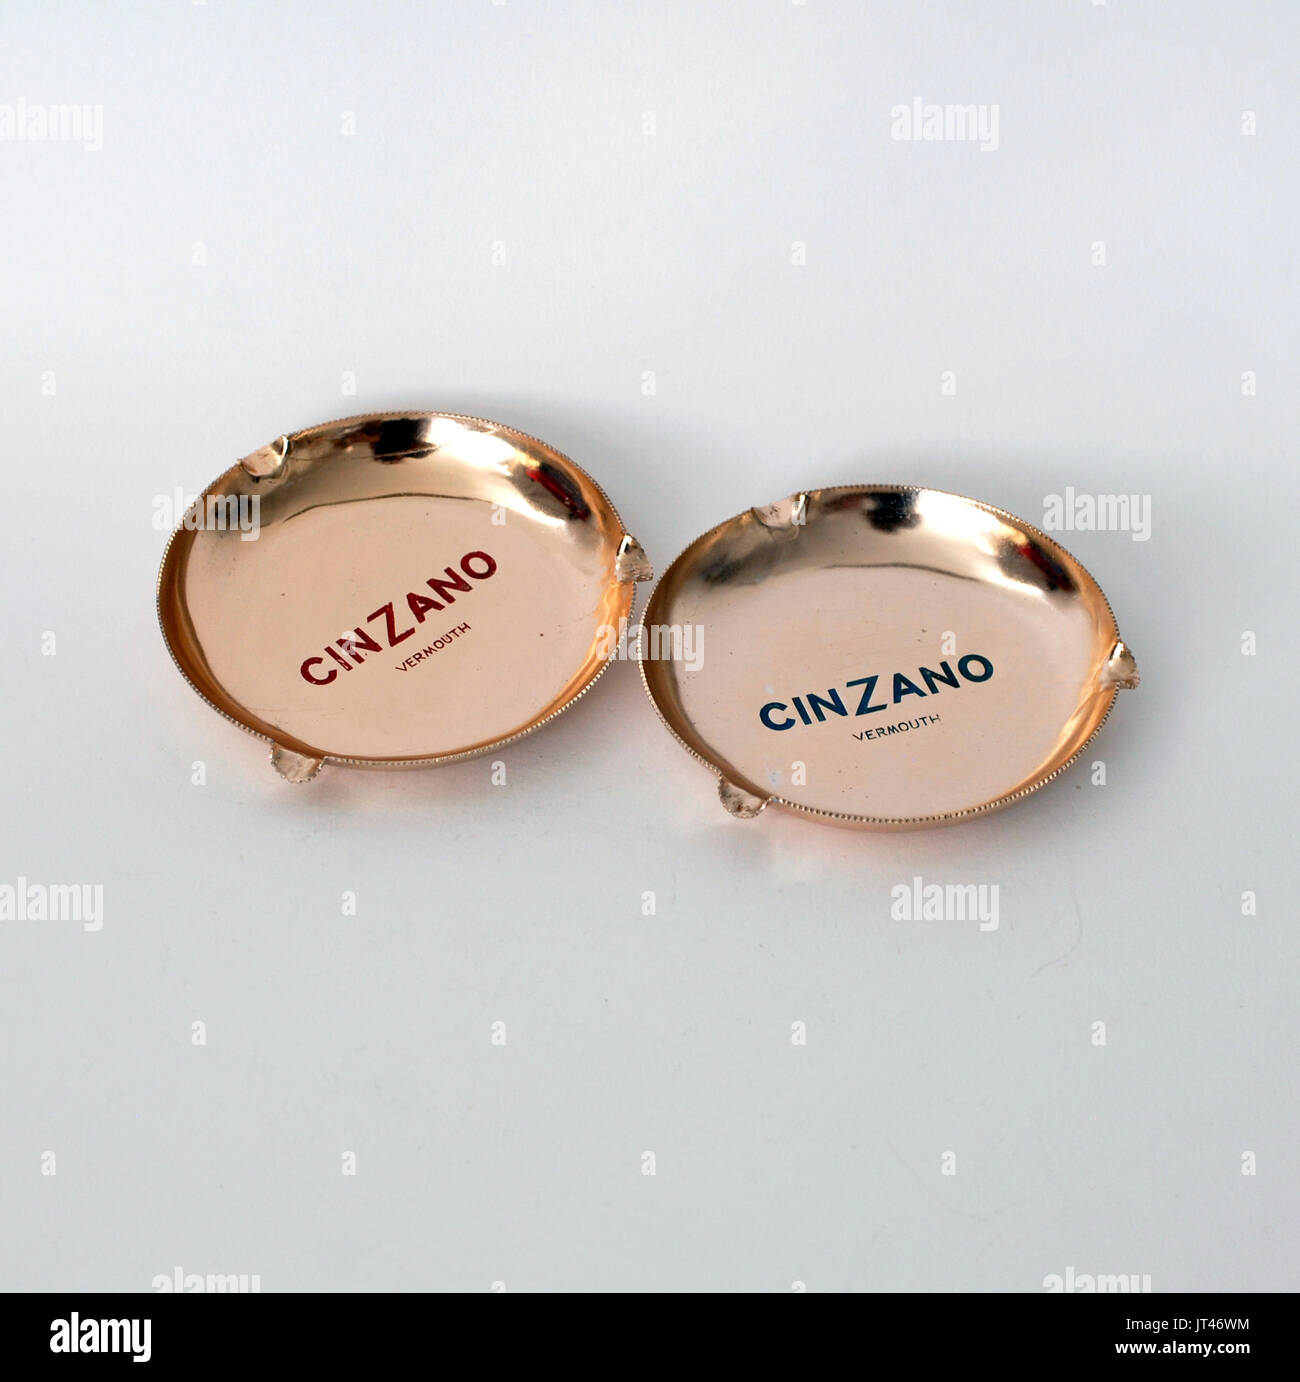 Two vintage ashtrays publicity logo Cinzano Vermouth, made by anodized aluminum, colors copper, blue and read. Round Stock Photo